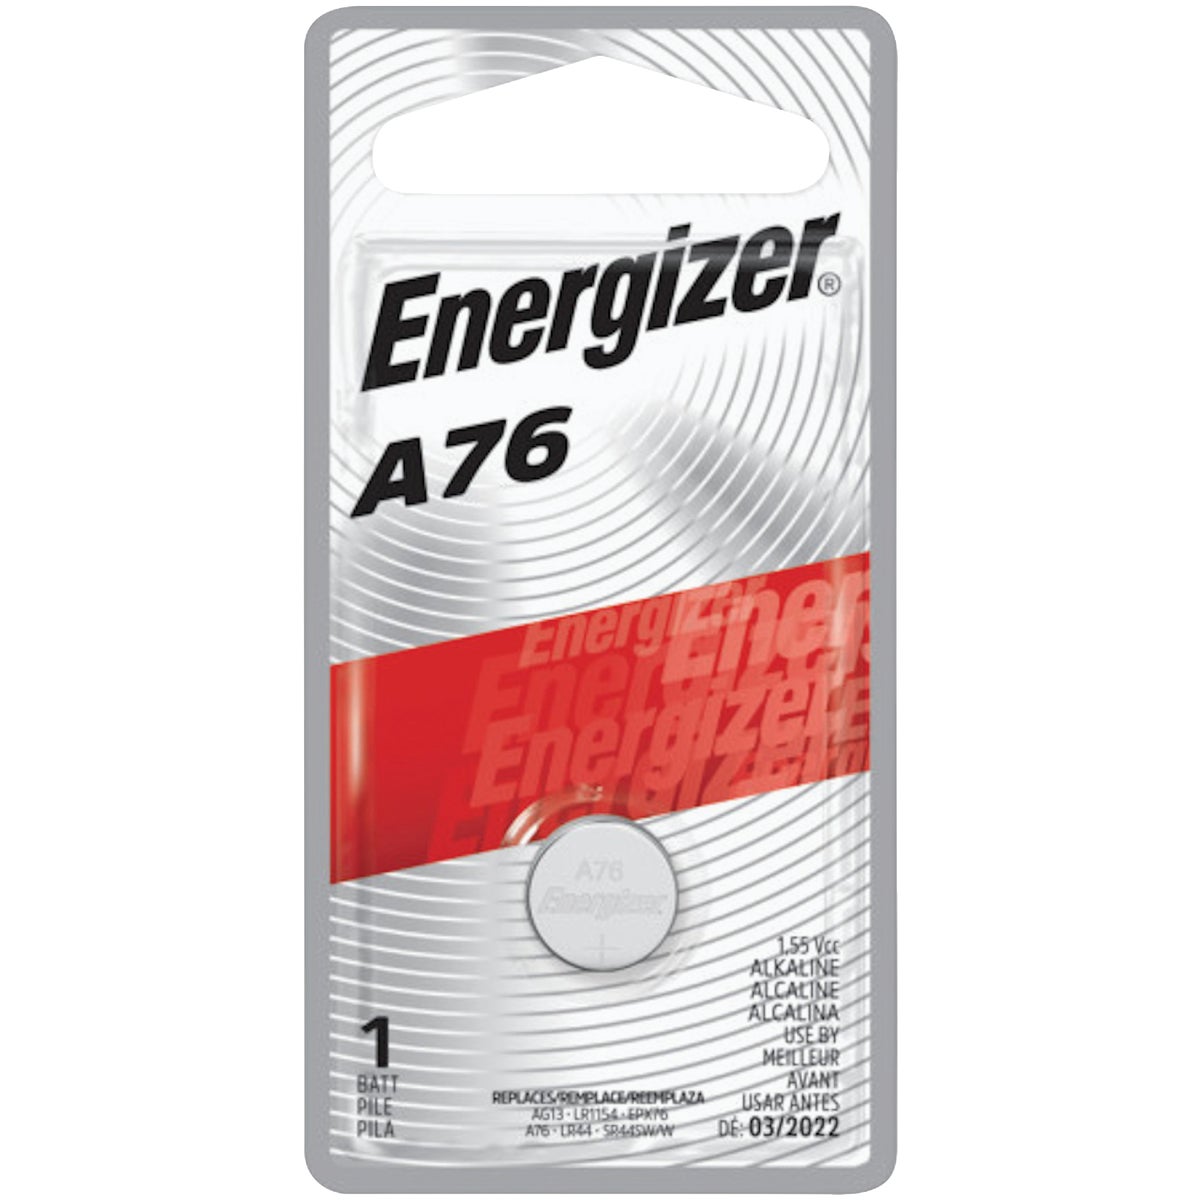 Item 807933, A76 batteries provide reliable power to your important gadgets.